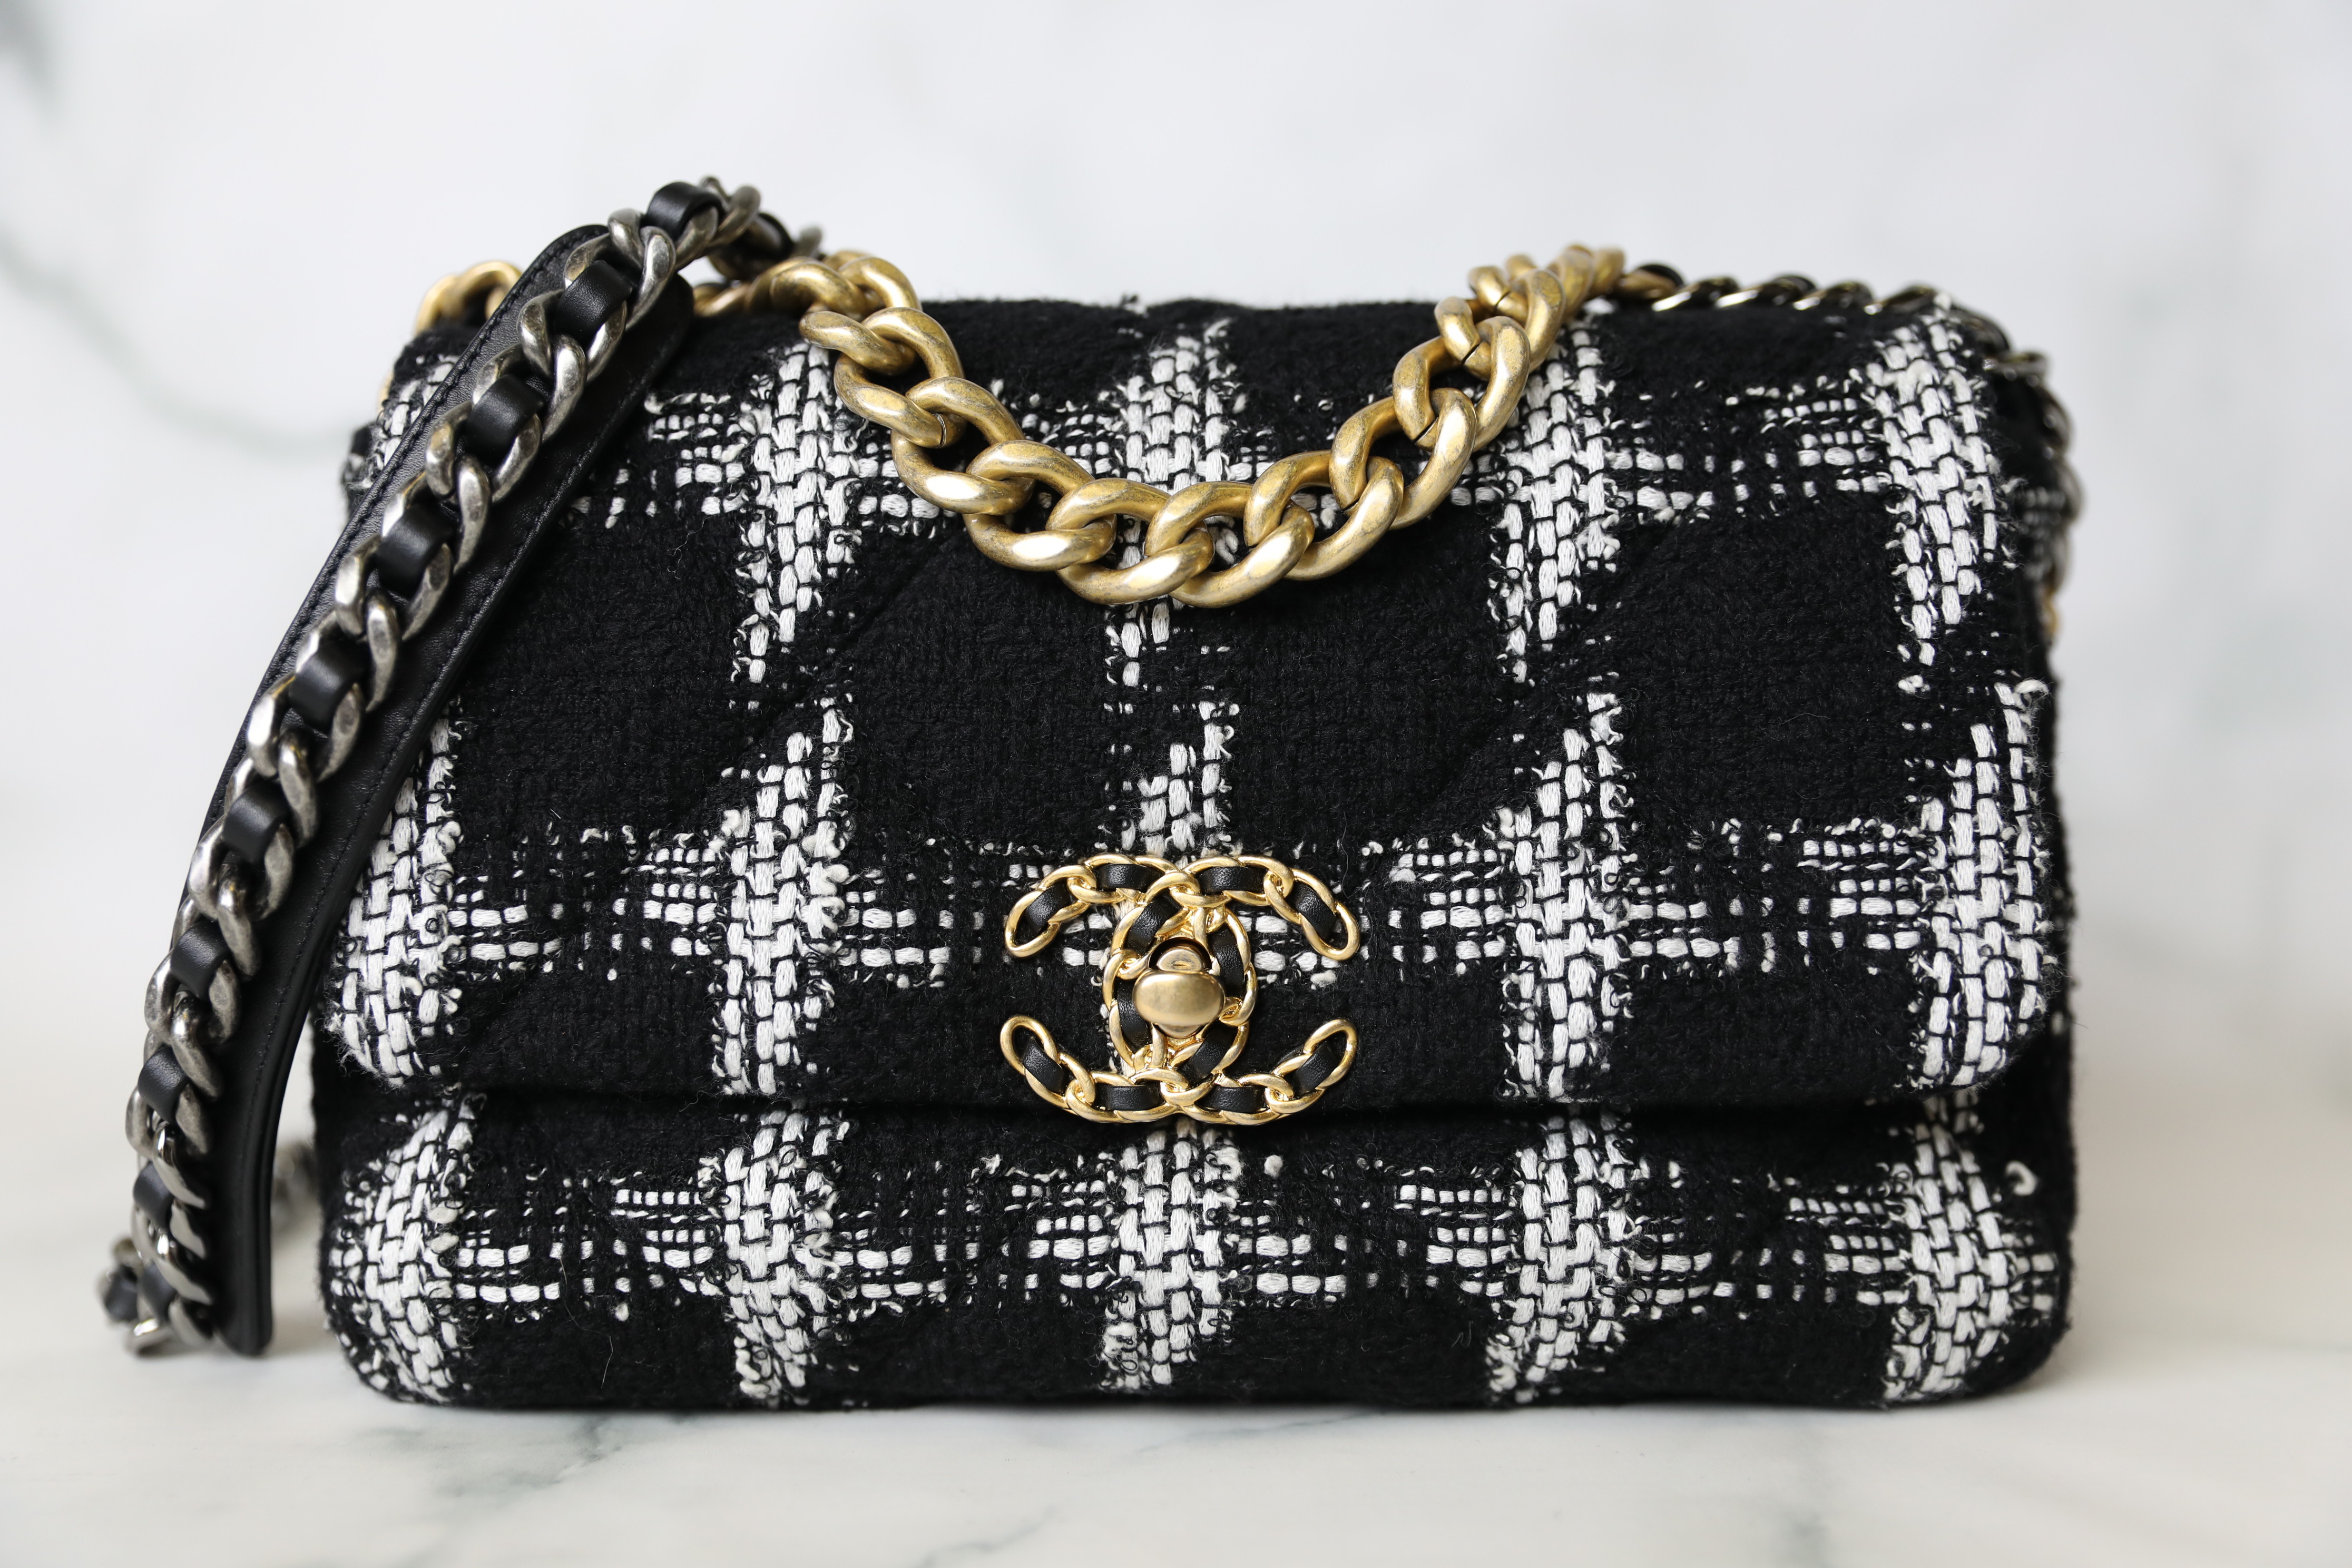 CHANEL 19 BLACK AND WHITE HOUNDSTOOTH TWEED - Chanel Pre-Owned 1994 Triple  CC tote bag - chanel pre owned 1997 twisted rope brooch item